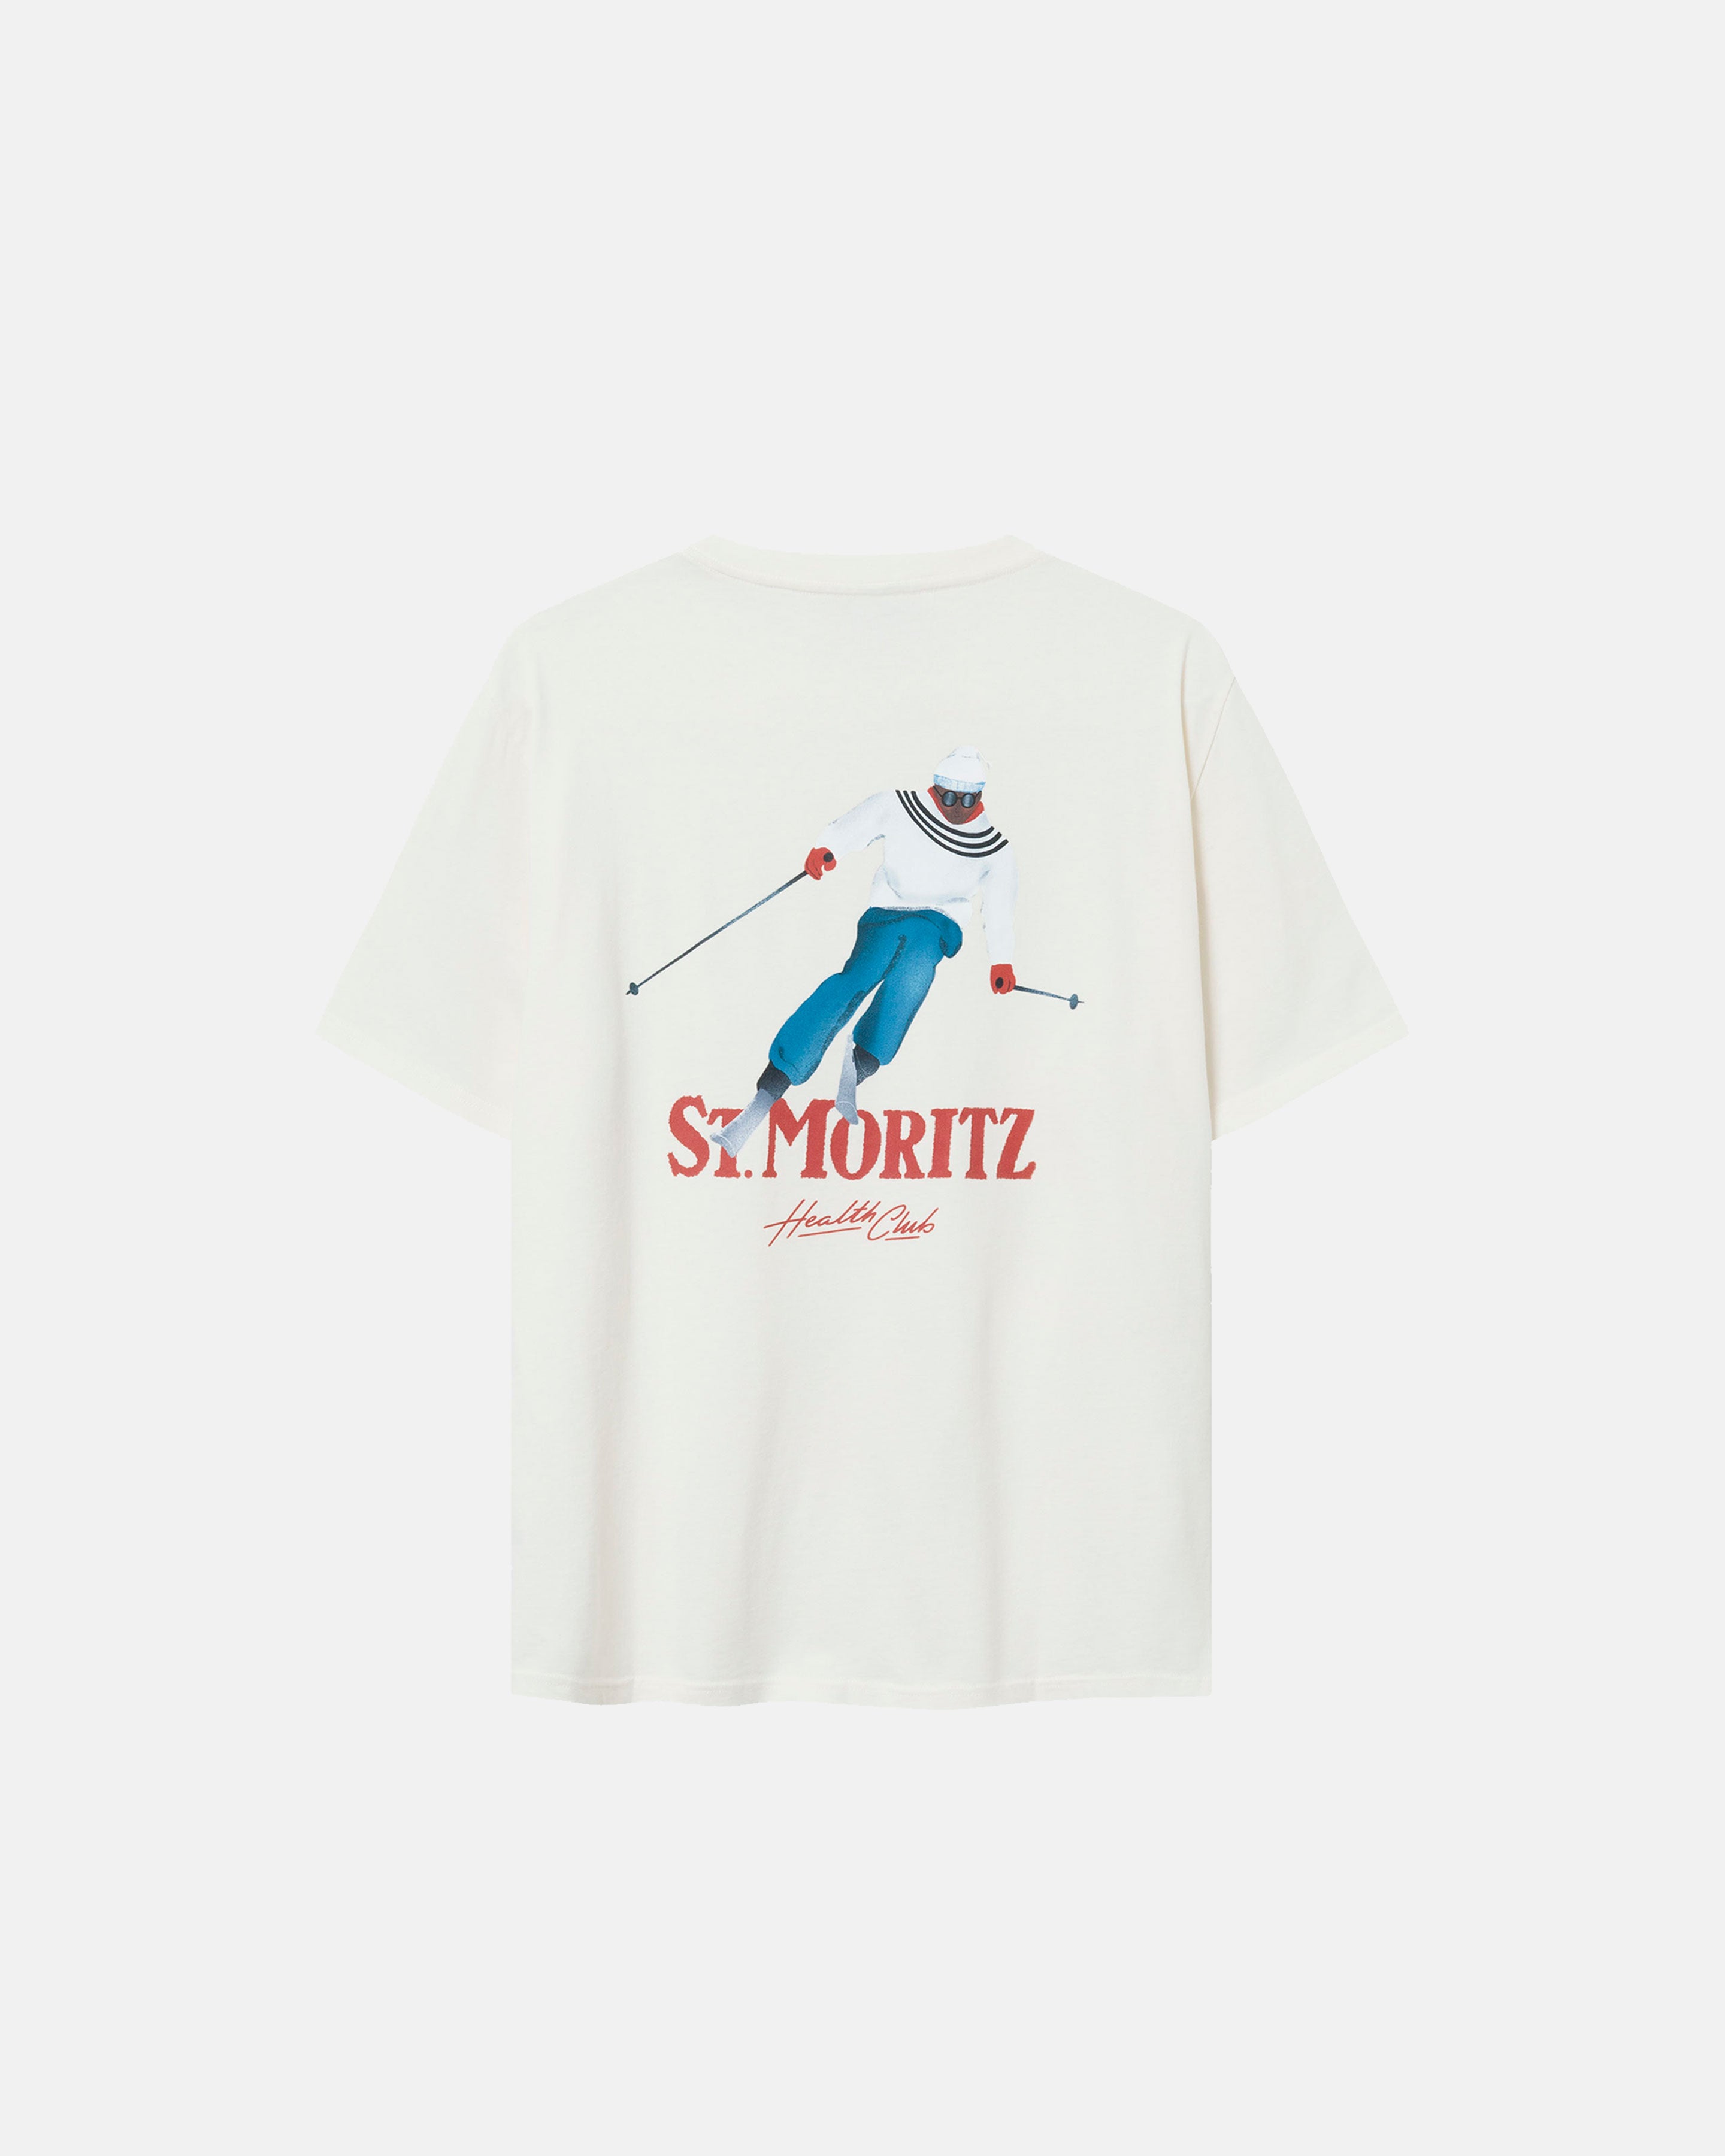 Back view of an off white t-shirt with a skier silhouette and red 